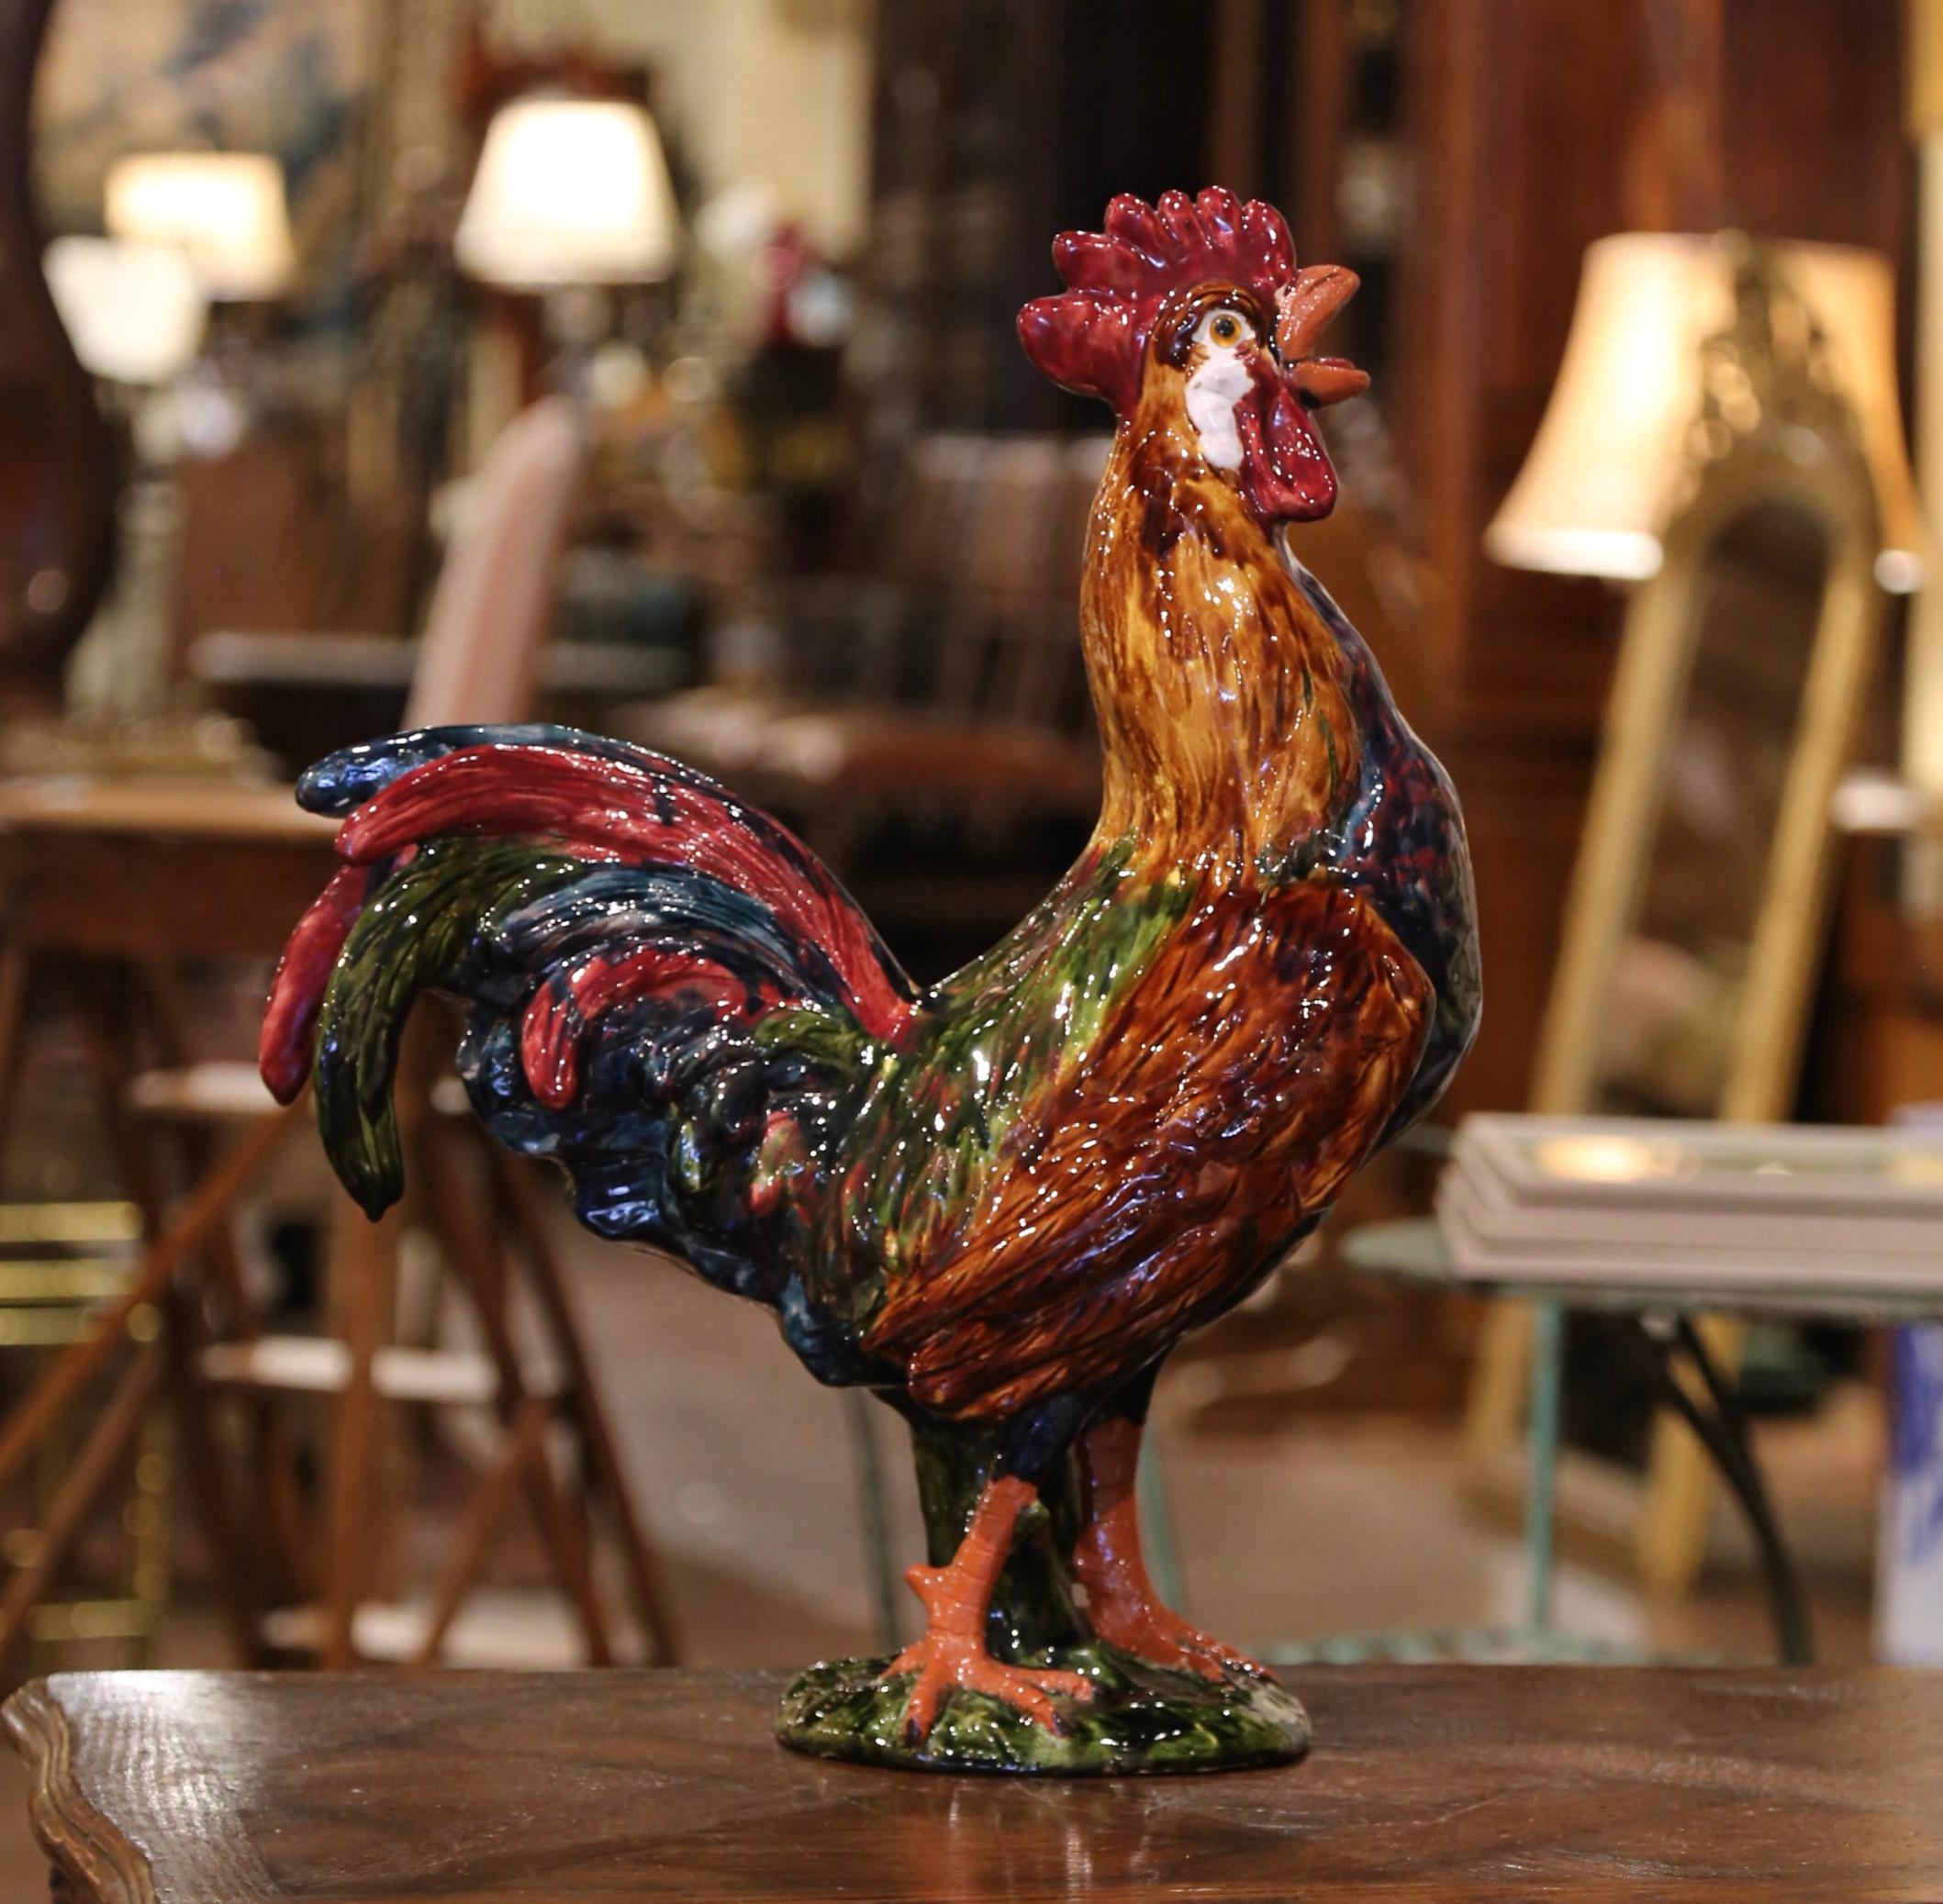 This large colorful Majolica rooster was crafted in Normandy, circa 1980. Hand painted in the blue, green and brown palette, the proud symbol of France stands tall on a green base. The ceramic sculpture is in excellent condition with rich hand